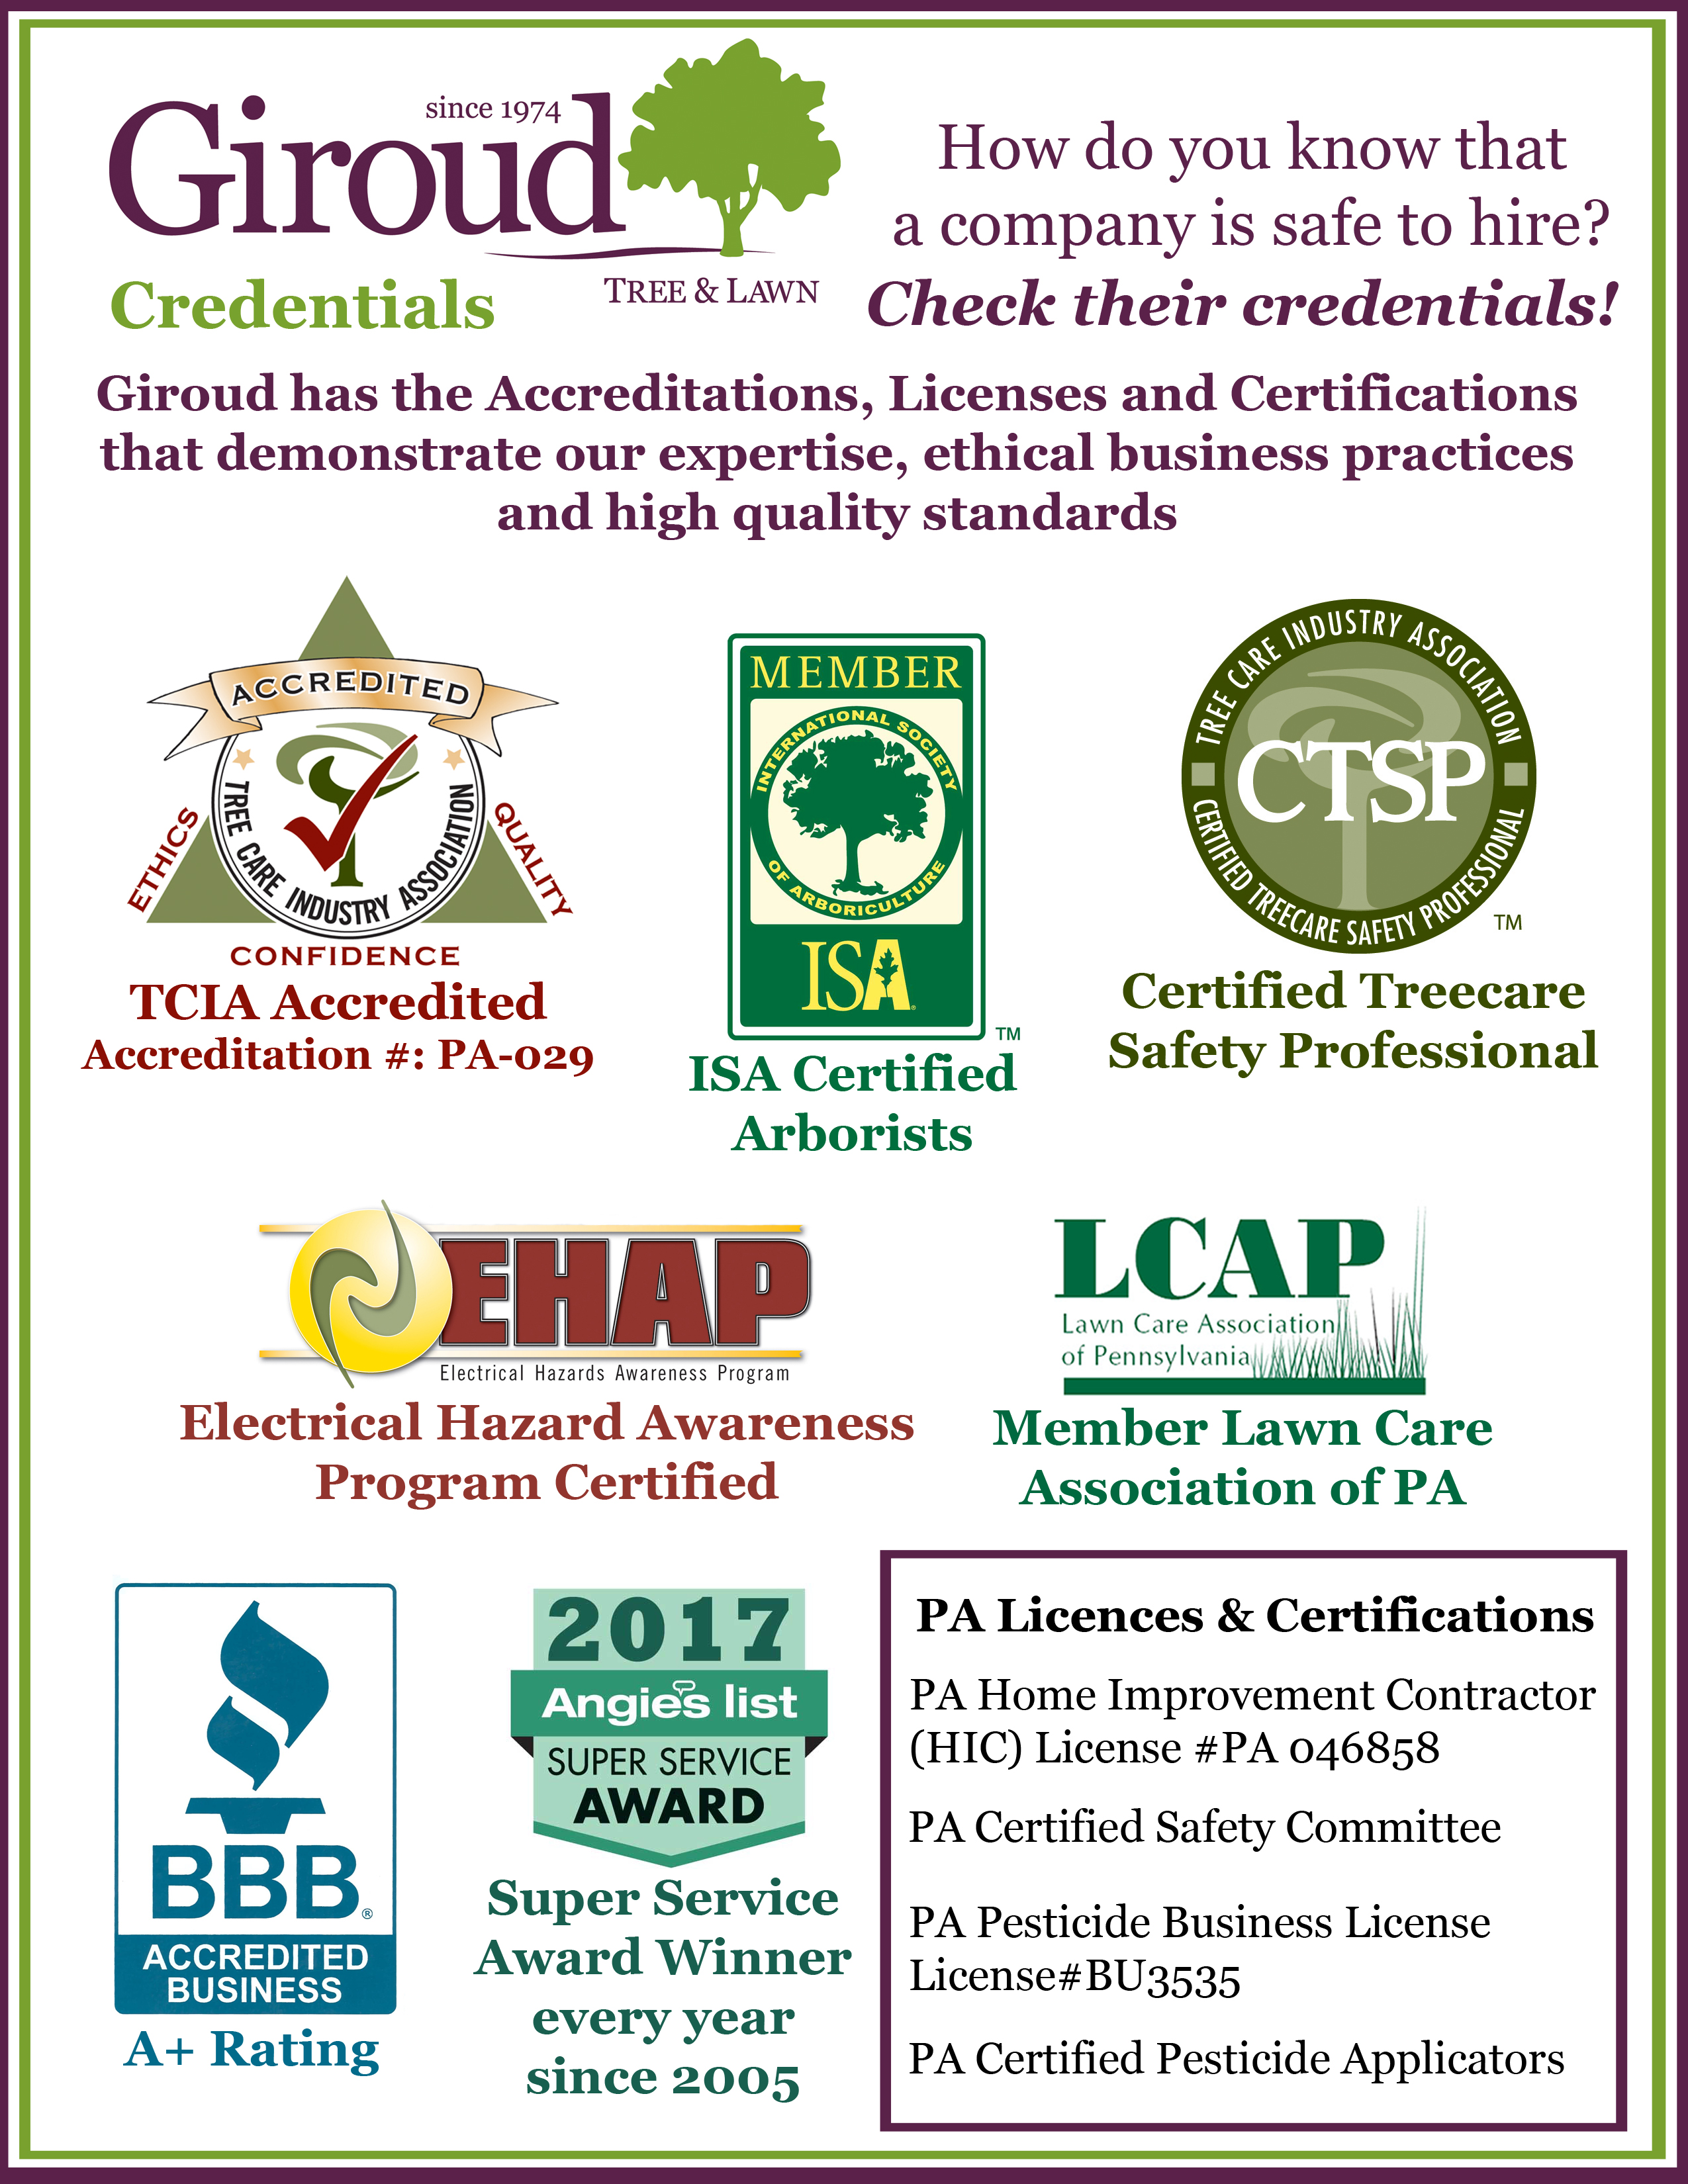 When choosing a company to care for your trees, shrubs and lawn, always check their credentials. Homeowners have trusted Giroud Tree & Lawn for over 40 years!